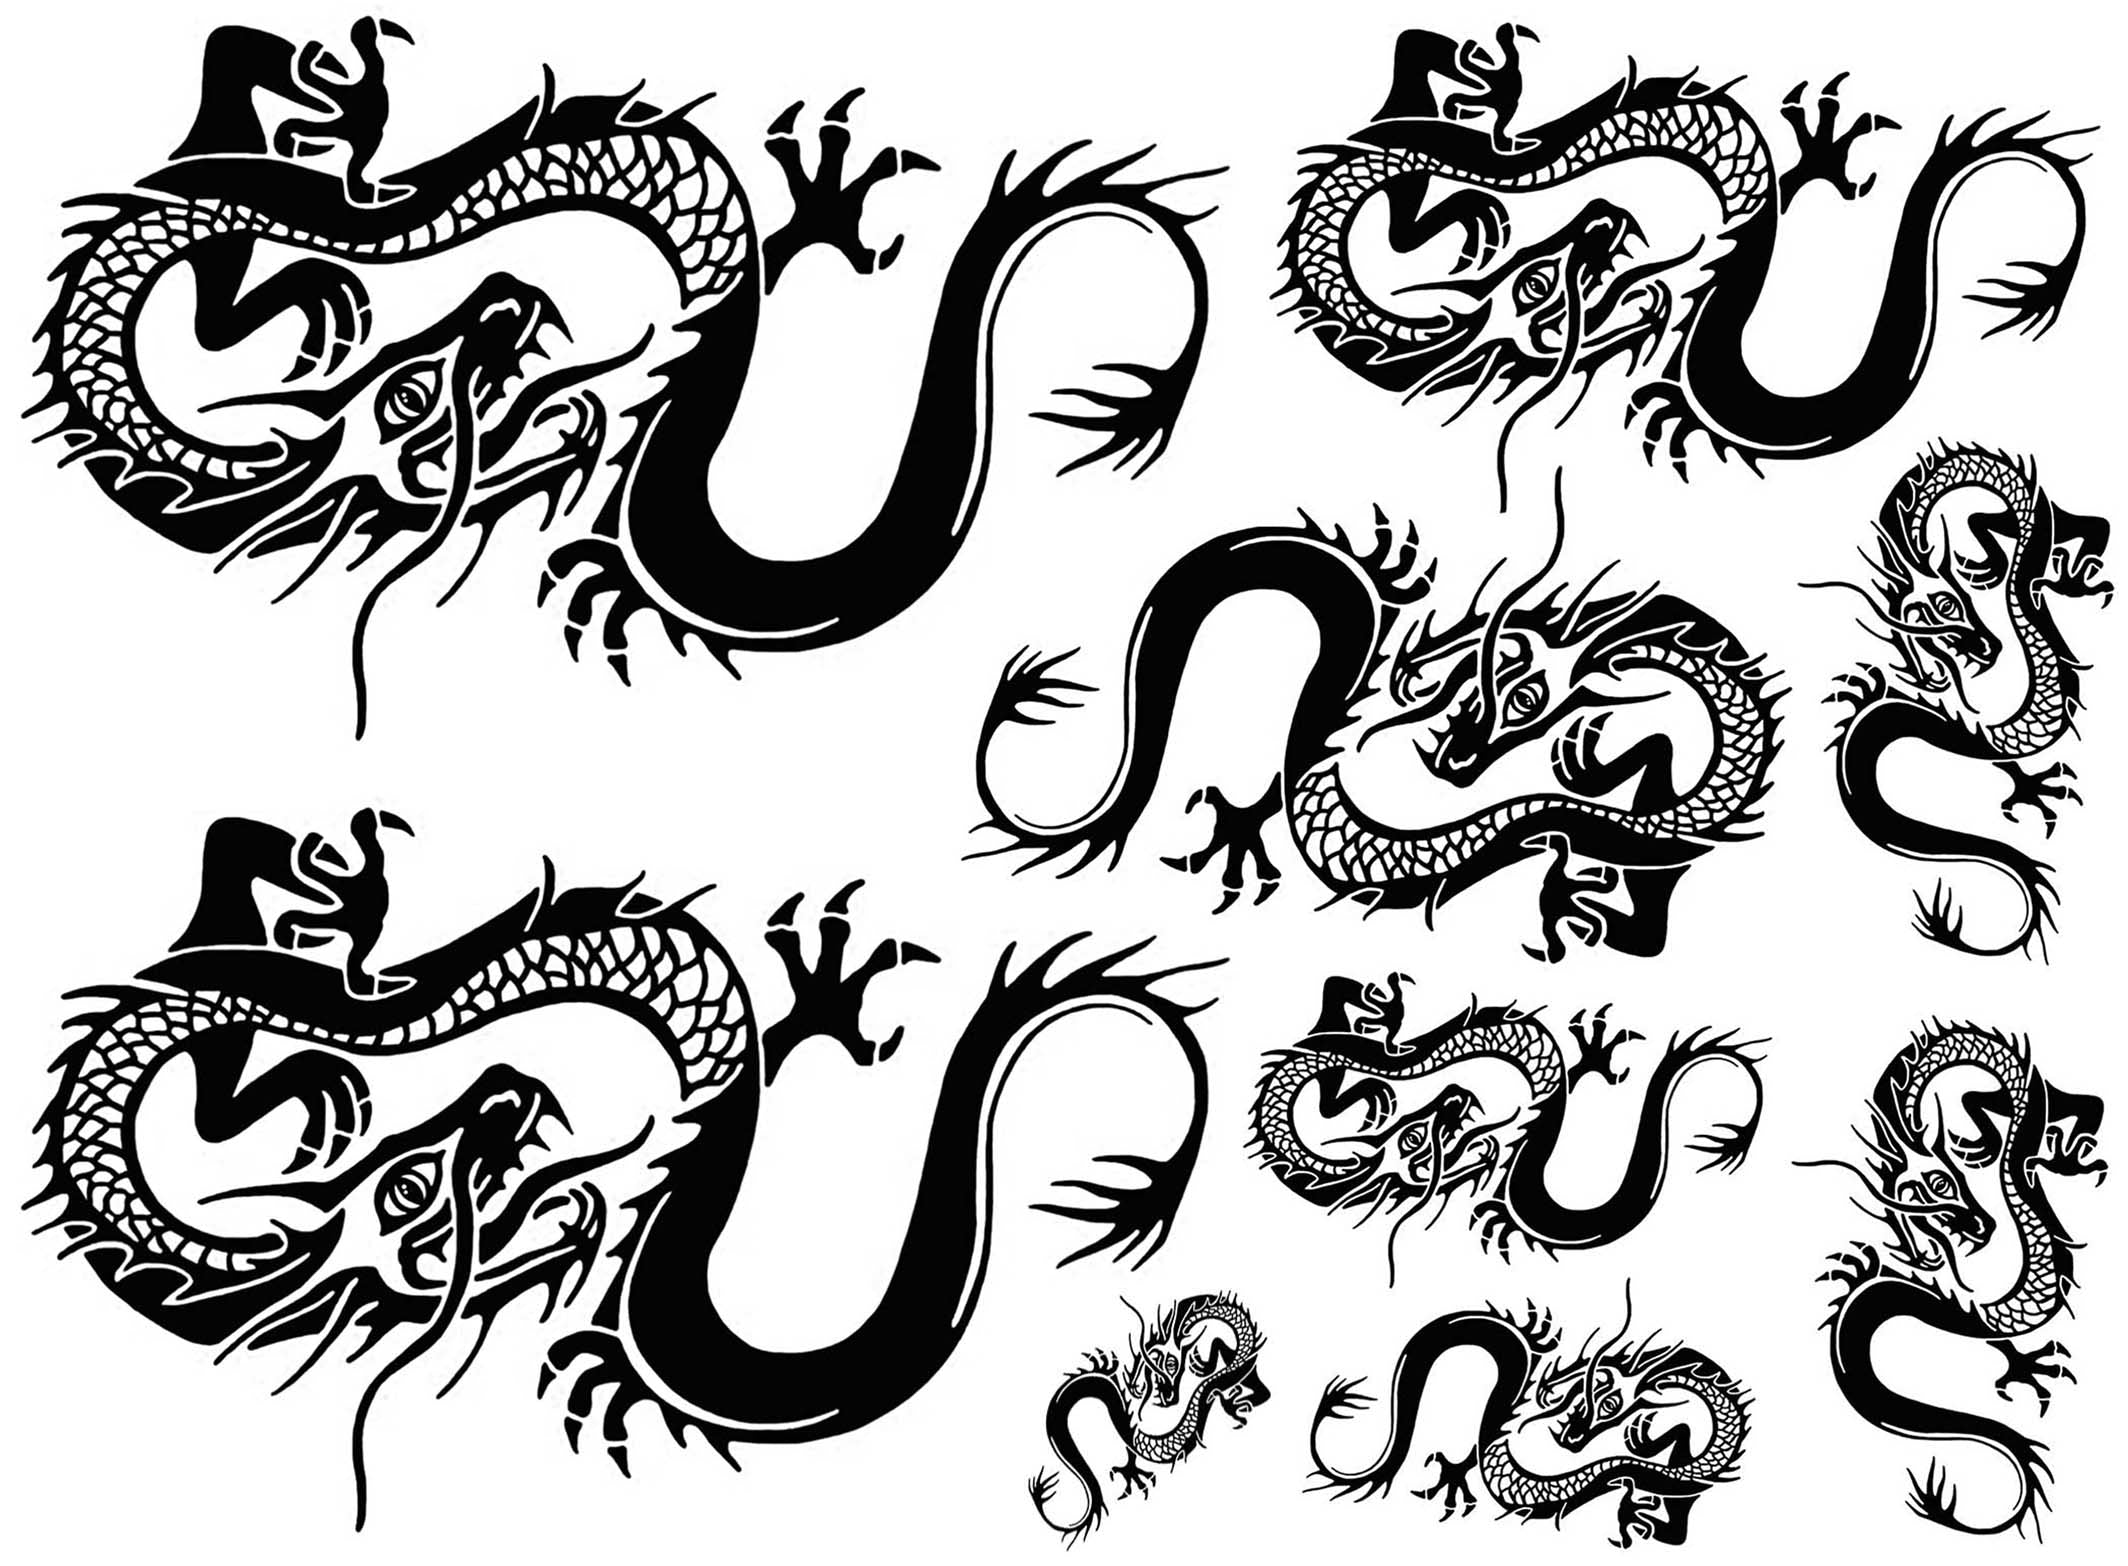 9 Ankle Dragon Tattoo Images, Stock Photos, 3D objects, & Vectors |  Shutterstock